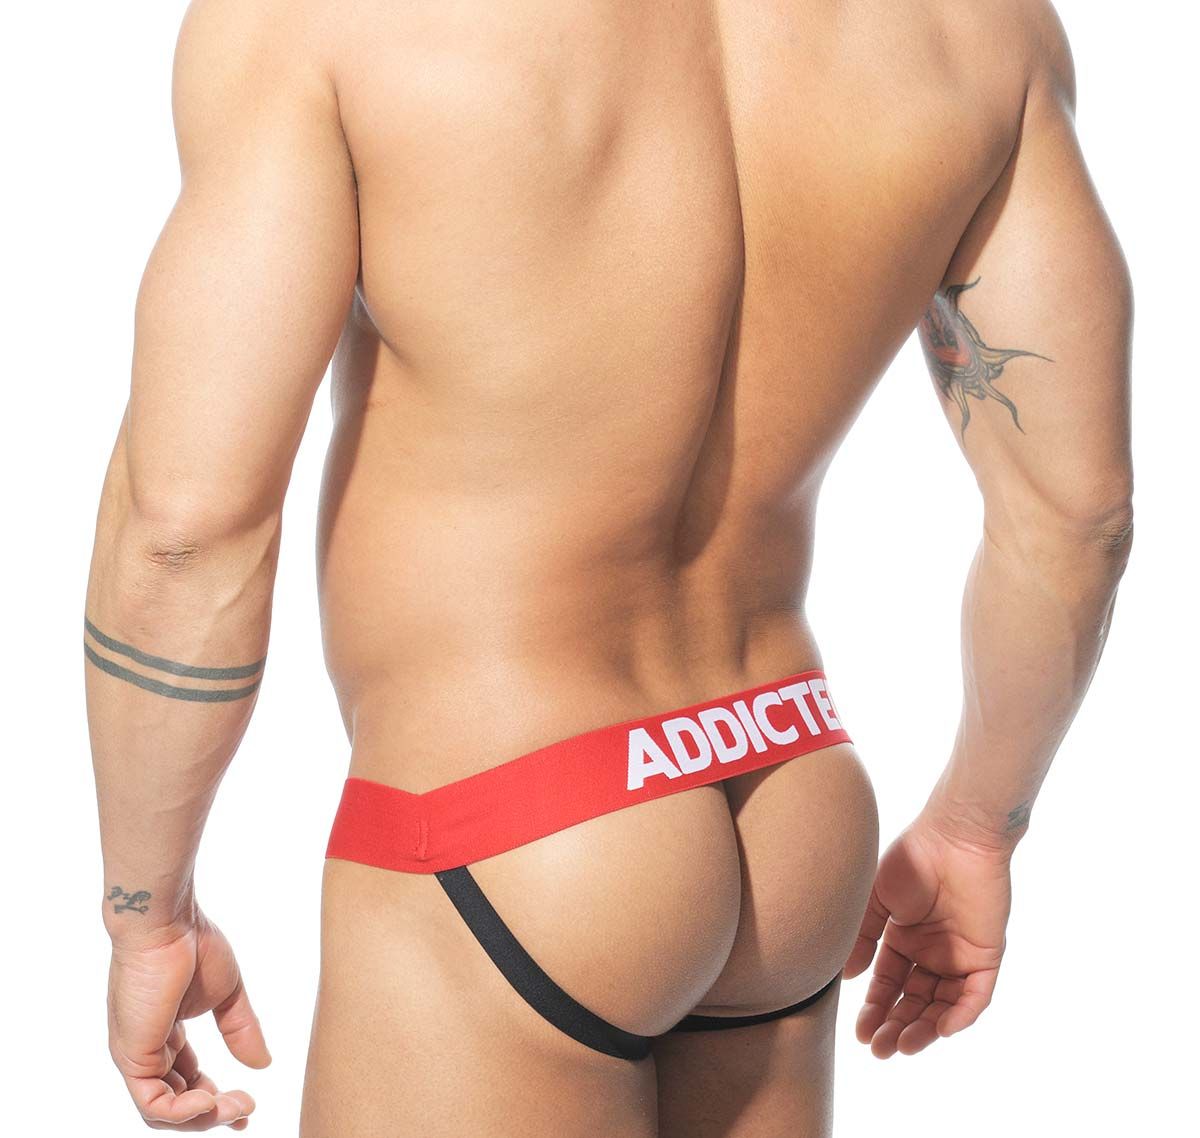 Addicted TIE-UP JOCK STRAP AD234, weiss